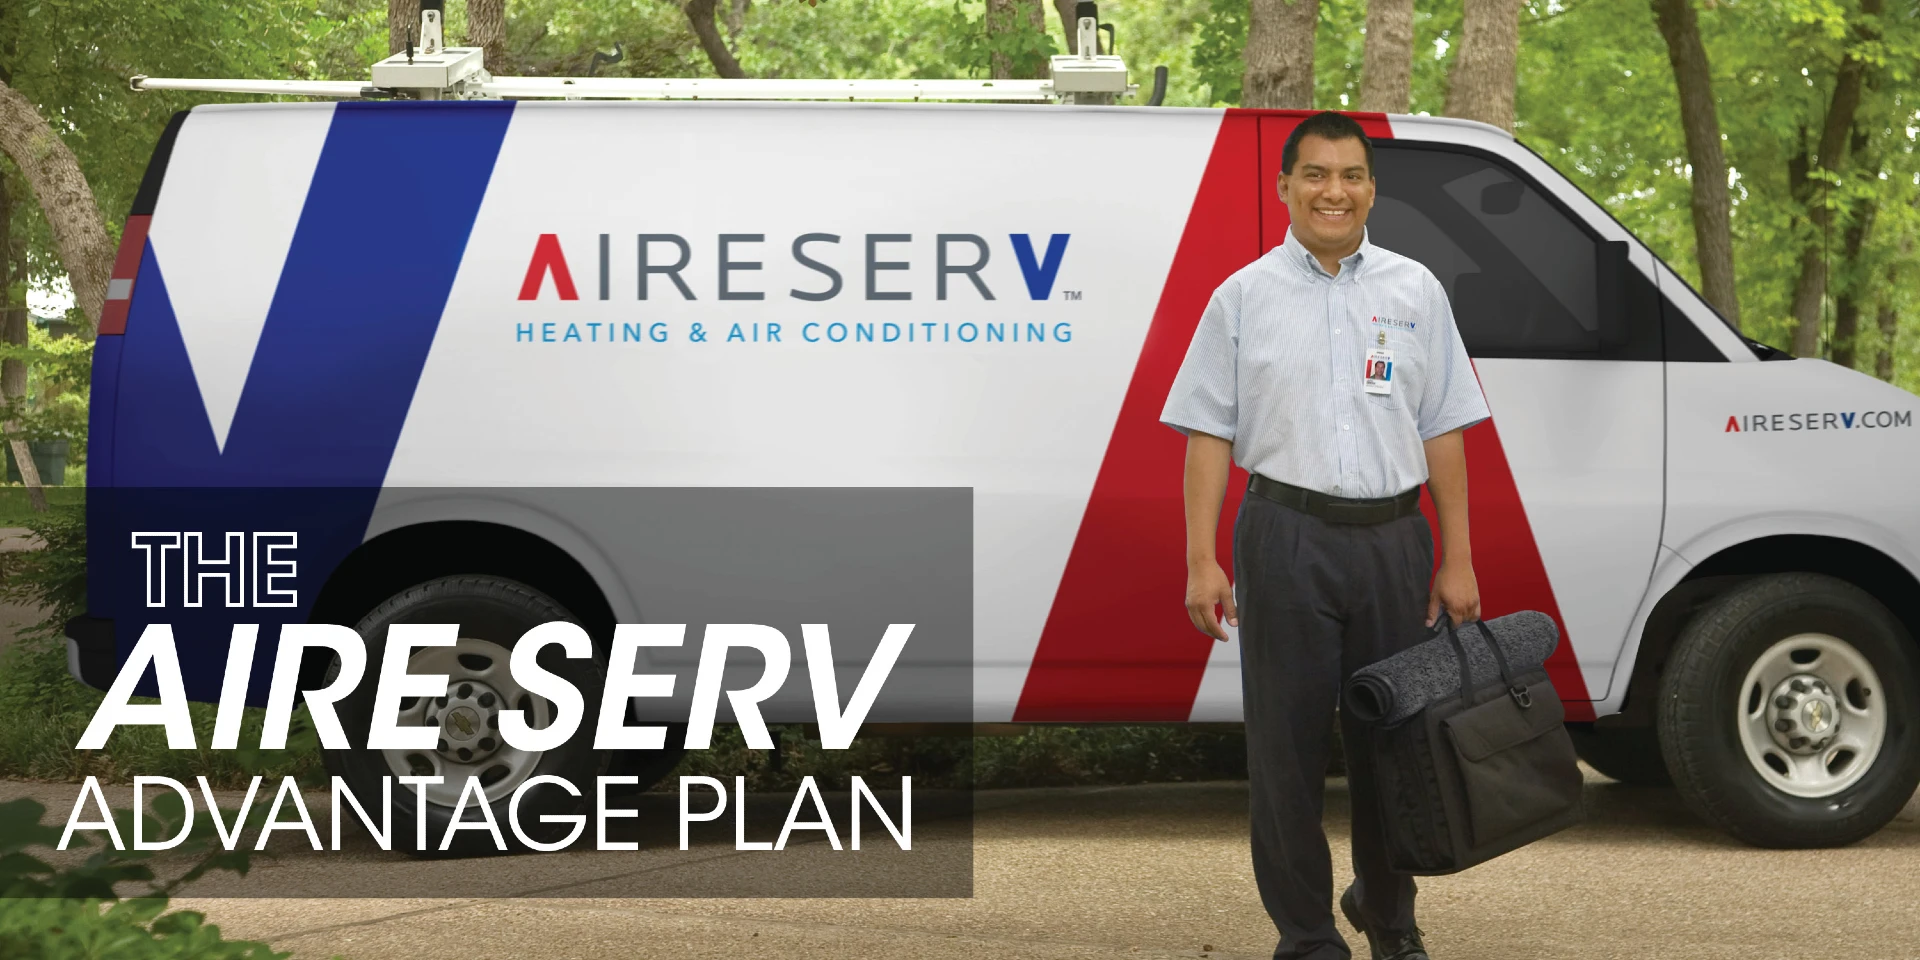 "The Aire Serv Advantage Plan" over a picture of an Aire Serv van and technician